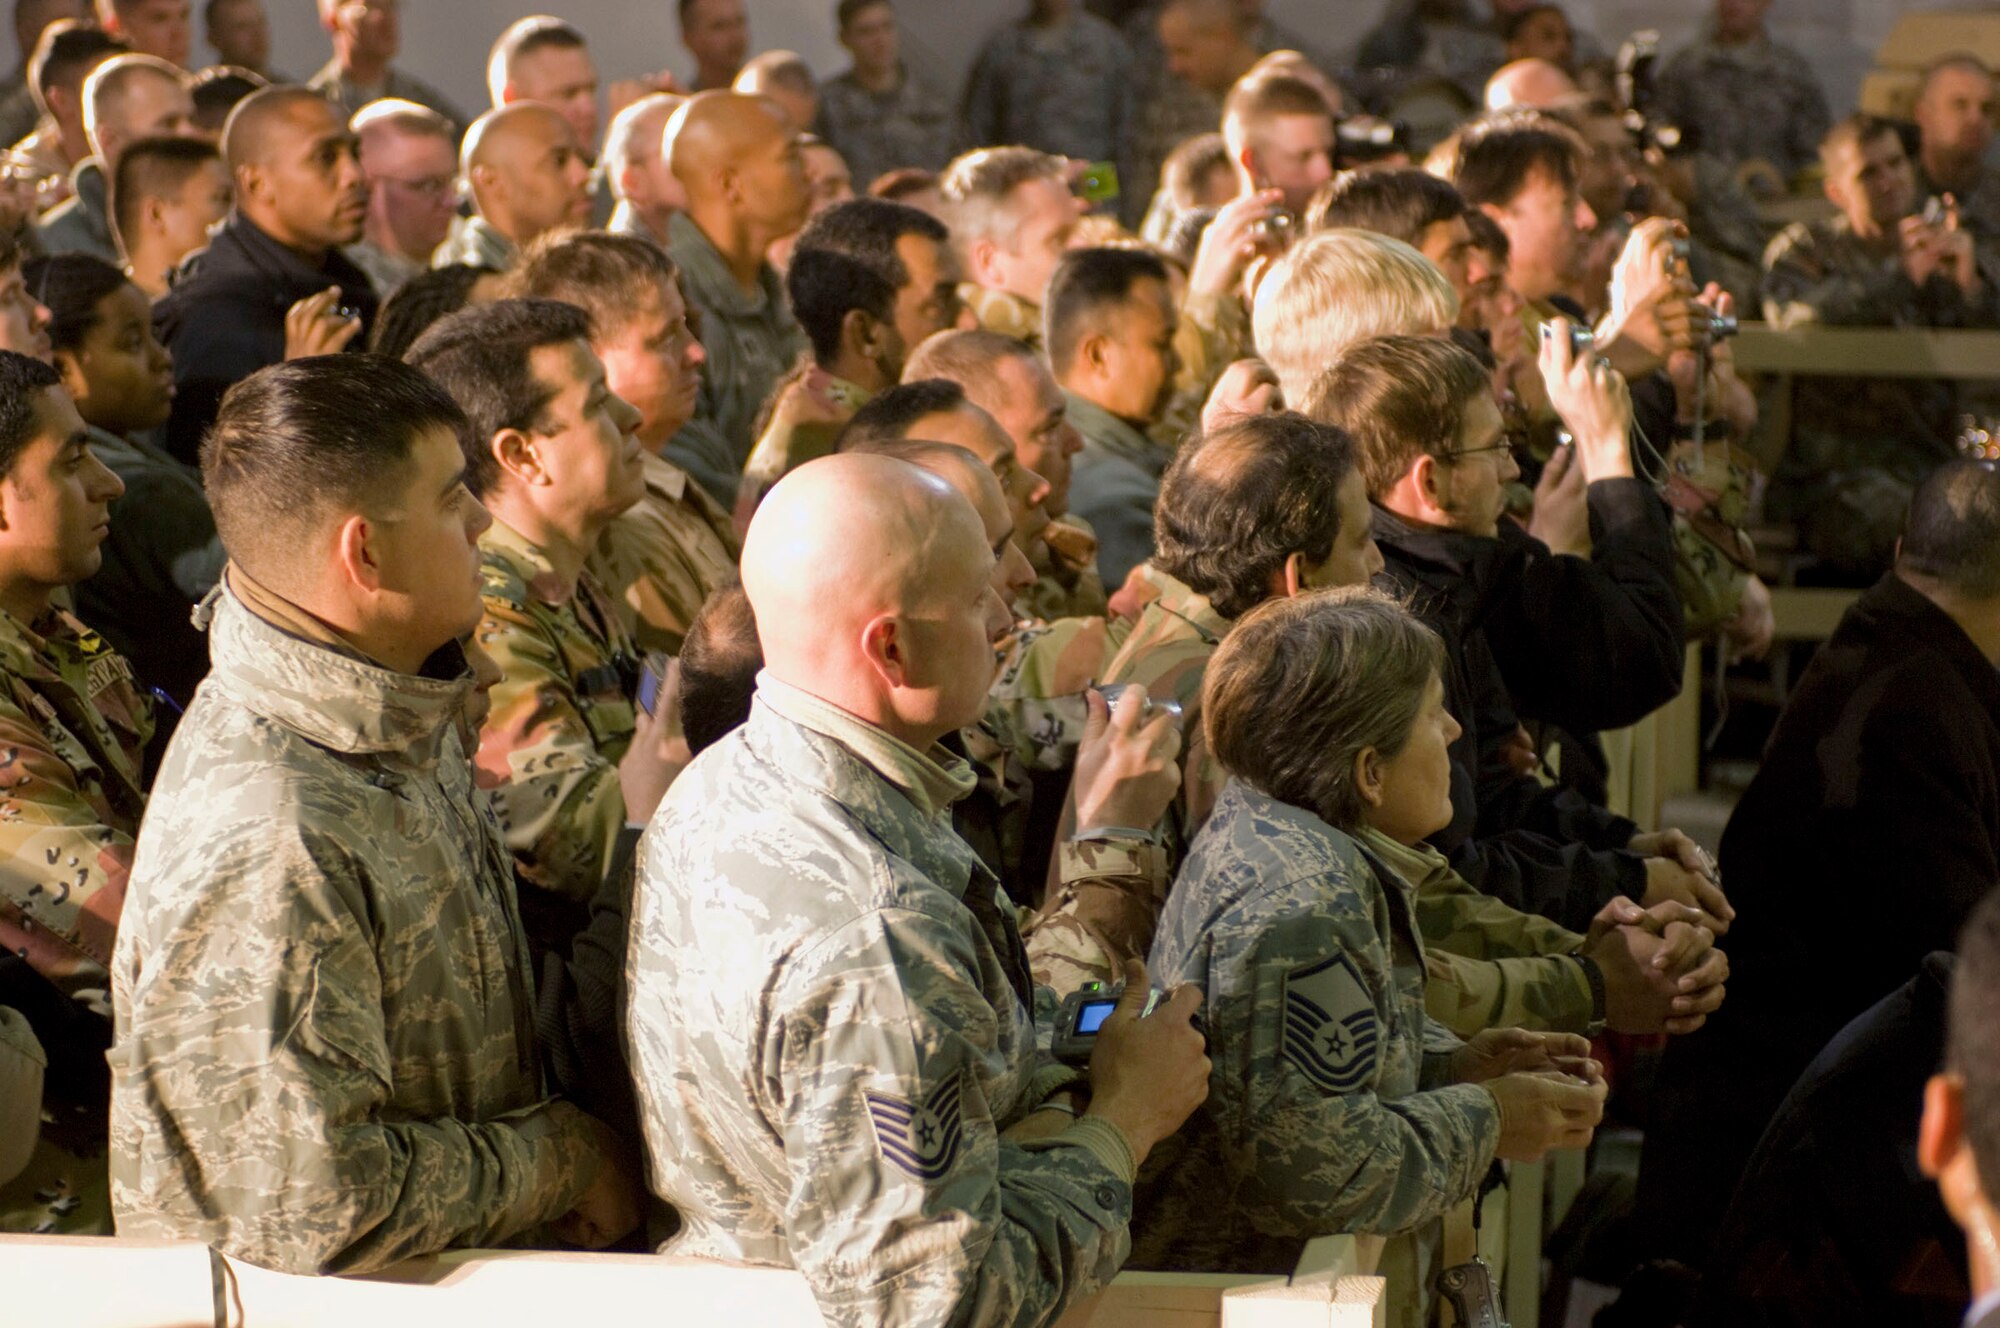 Airmen, joined by other U.S. and Coalition servicemembers, listen to a speech by President George W. Bush at Bagram Air Field, Afghanistan, Dec. 15. During his final visit to Afghanistan as commander in chief, President Bush thanked all the servicemembers for their service, especially during the holiday season. (U.S. Air Force photo by Staff Sgt. Rachel Martinez) (Released)